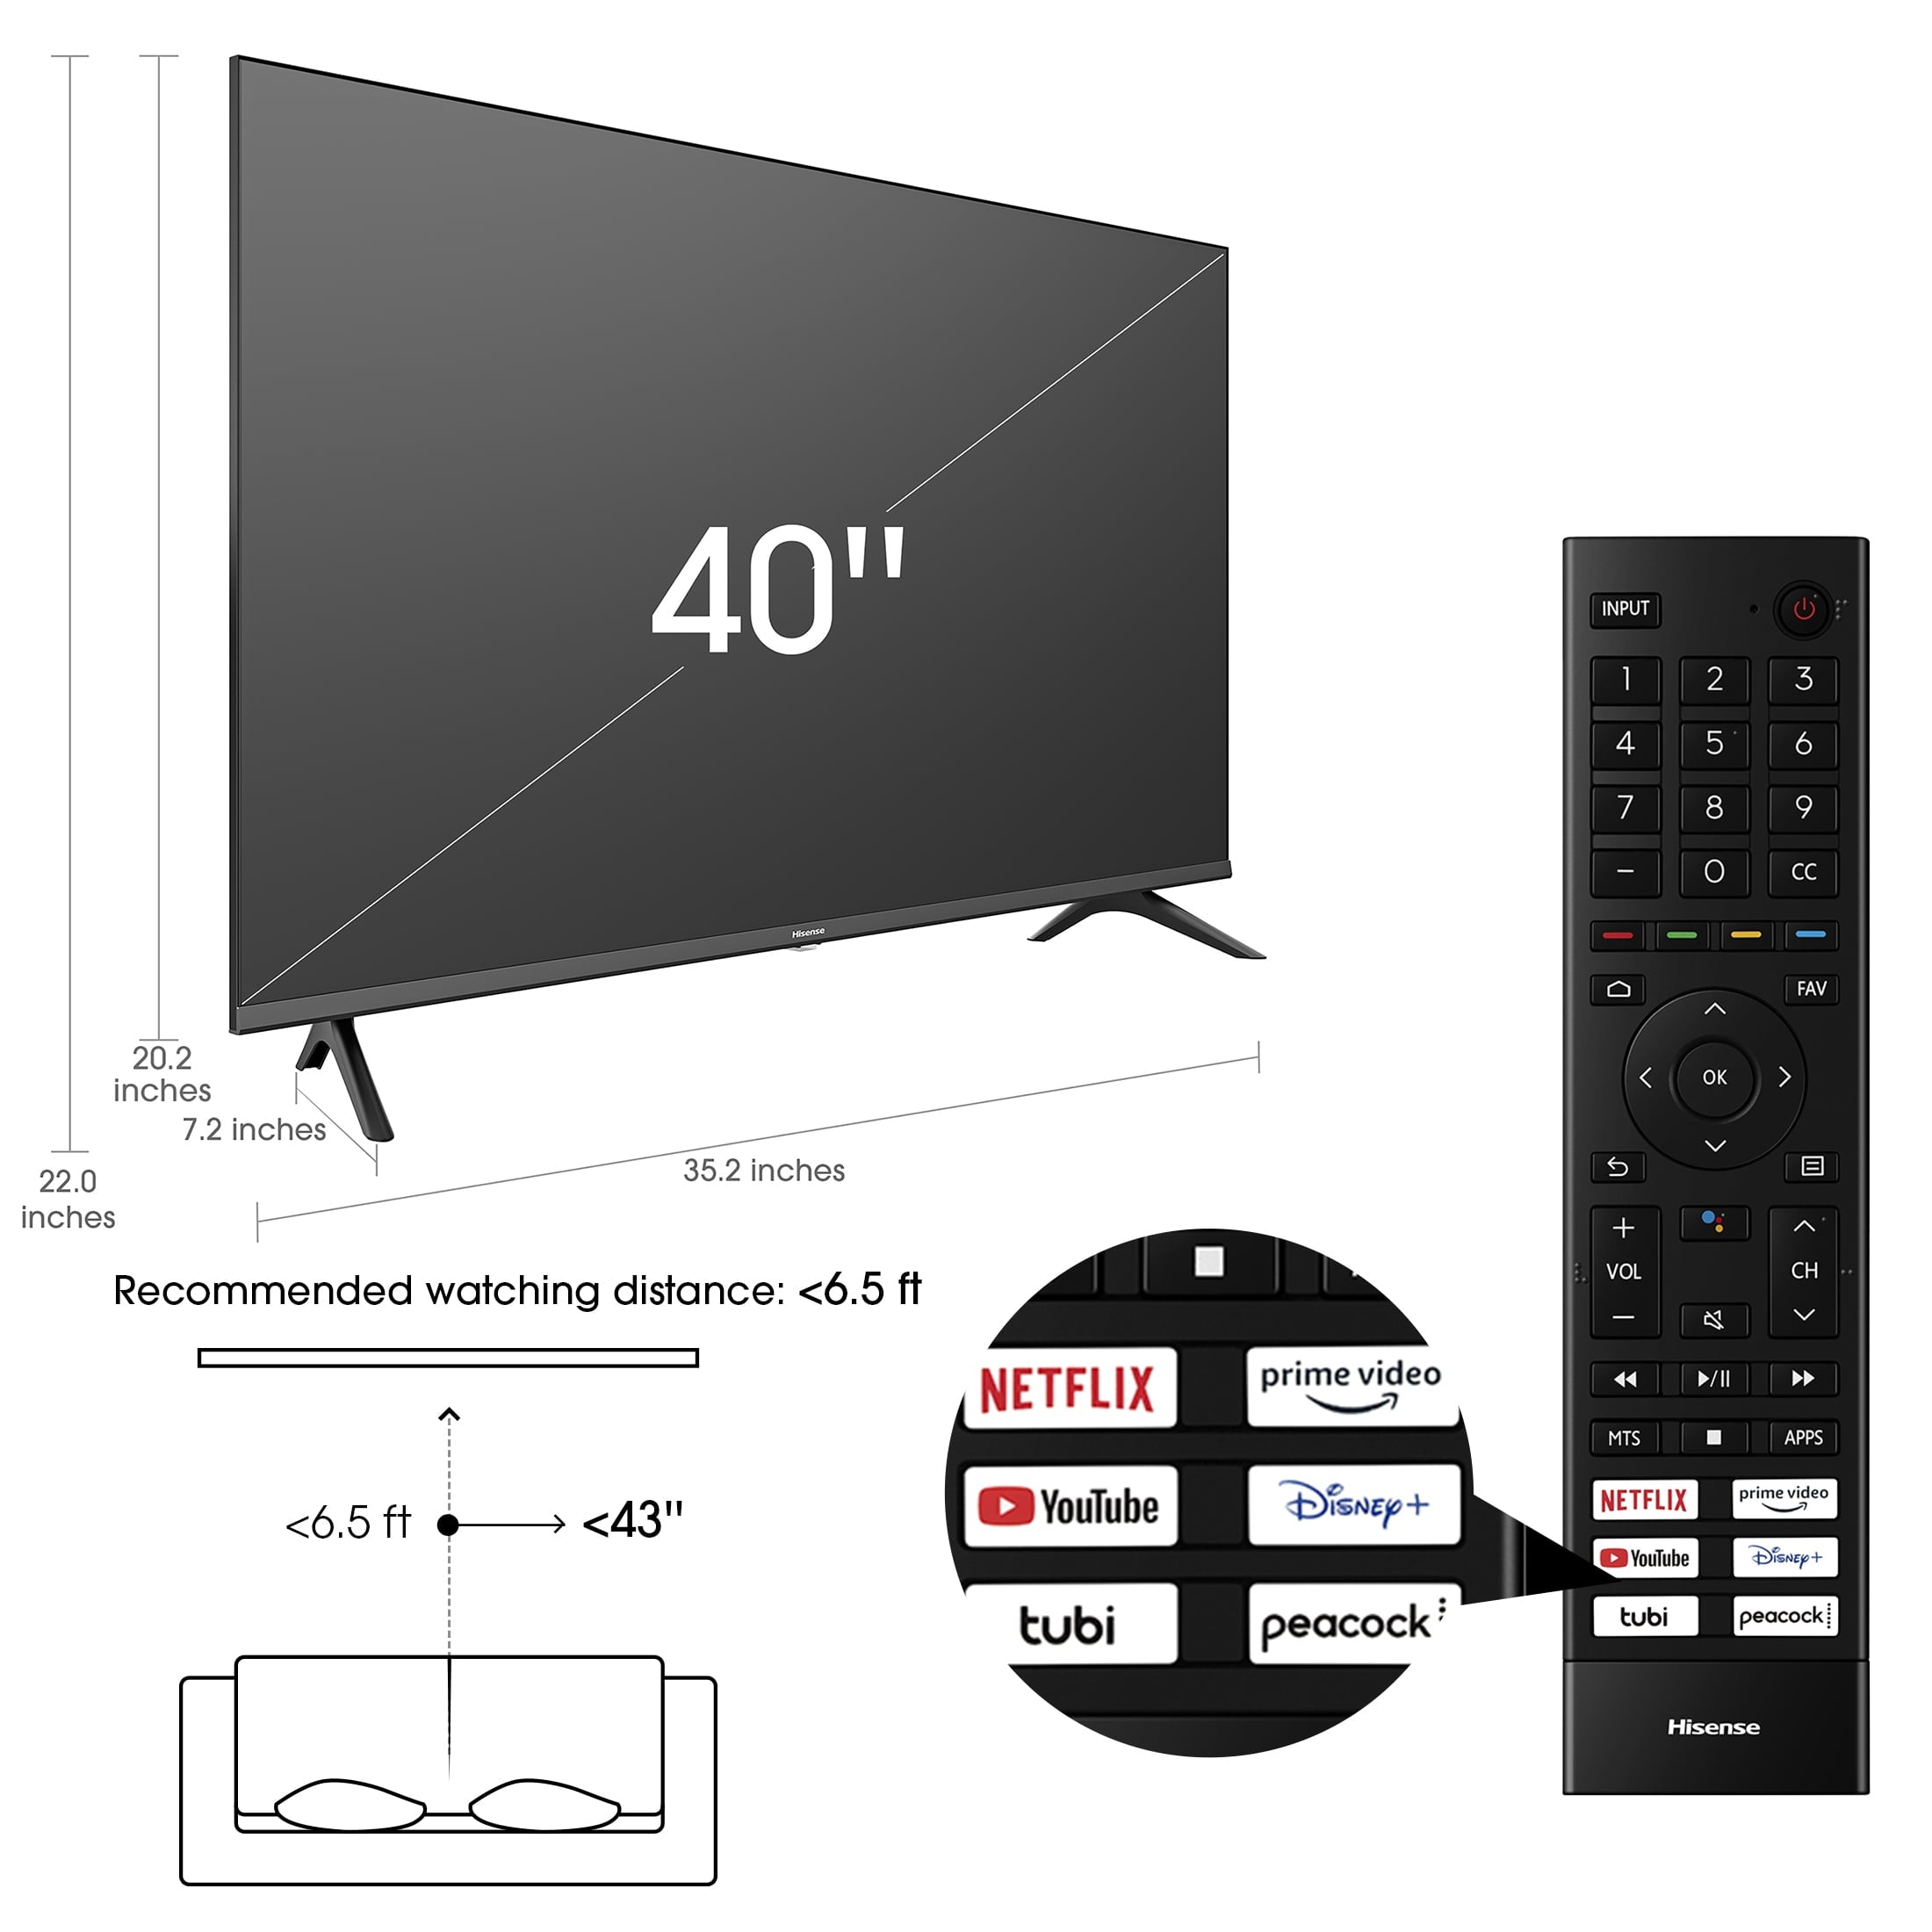 Hisense A4 Series 40 Inch Class HD Smart Android TV